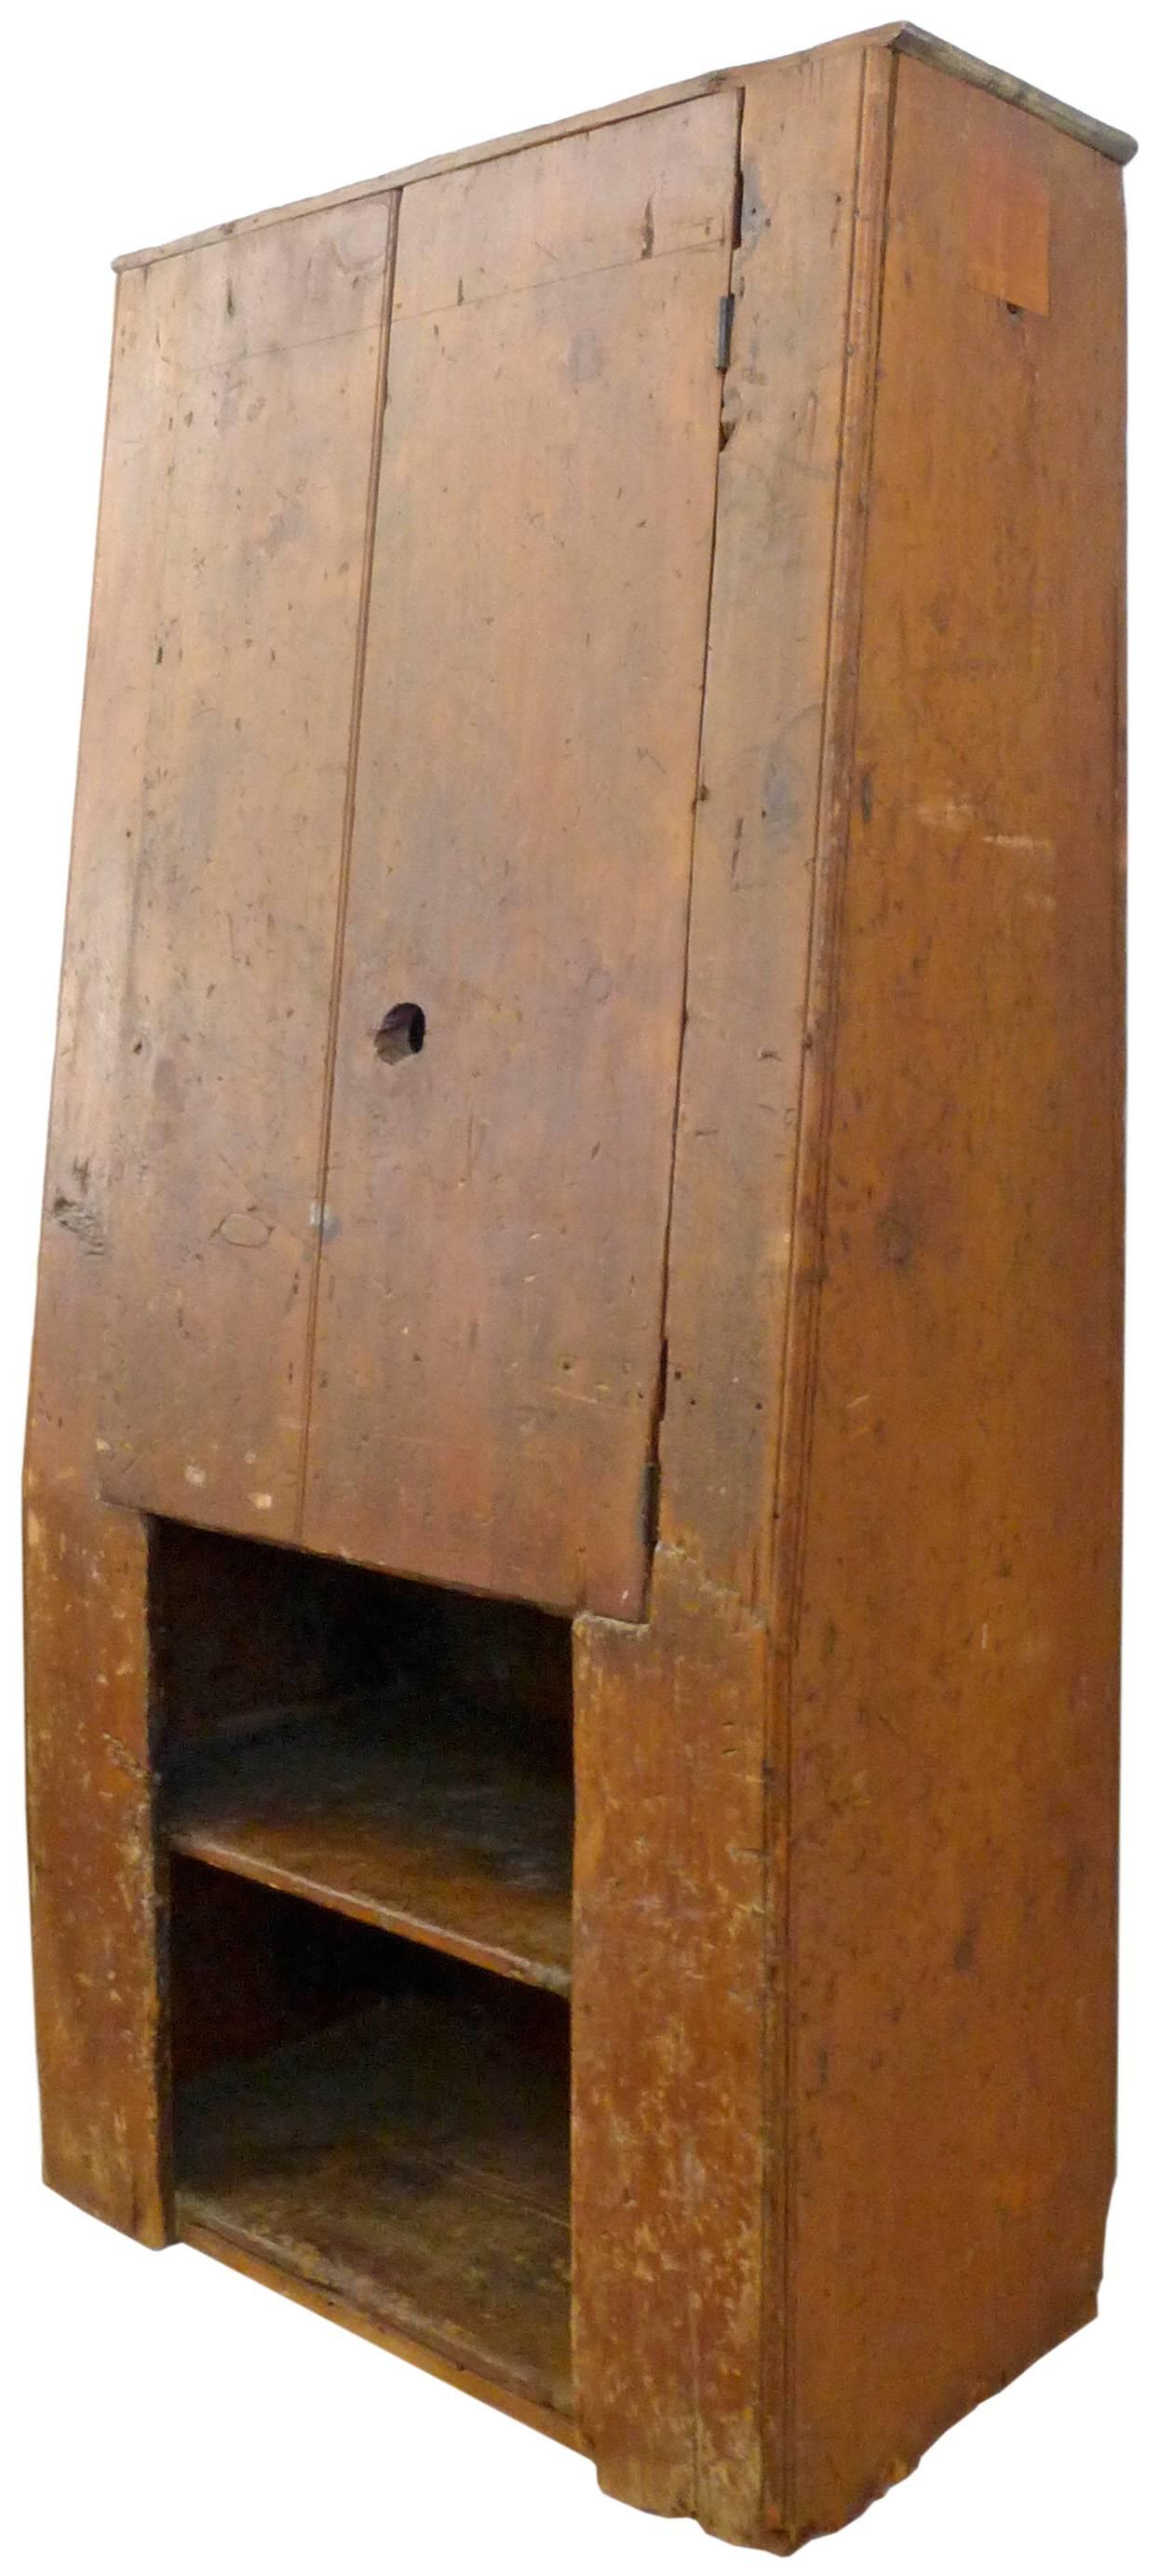 An unusual and architectural American Primitive cabinet from the mid-18th century. A beautiful and rarely-seen canted-front form in American pine. A special storage option hailing from Vermont with great character and lines. This cabinet would mix